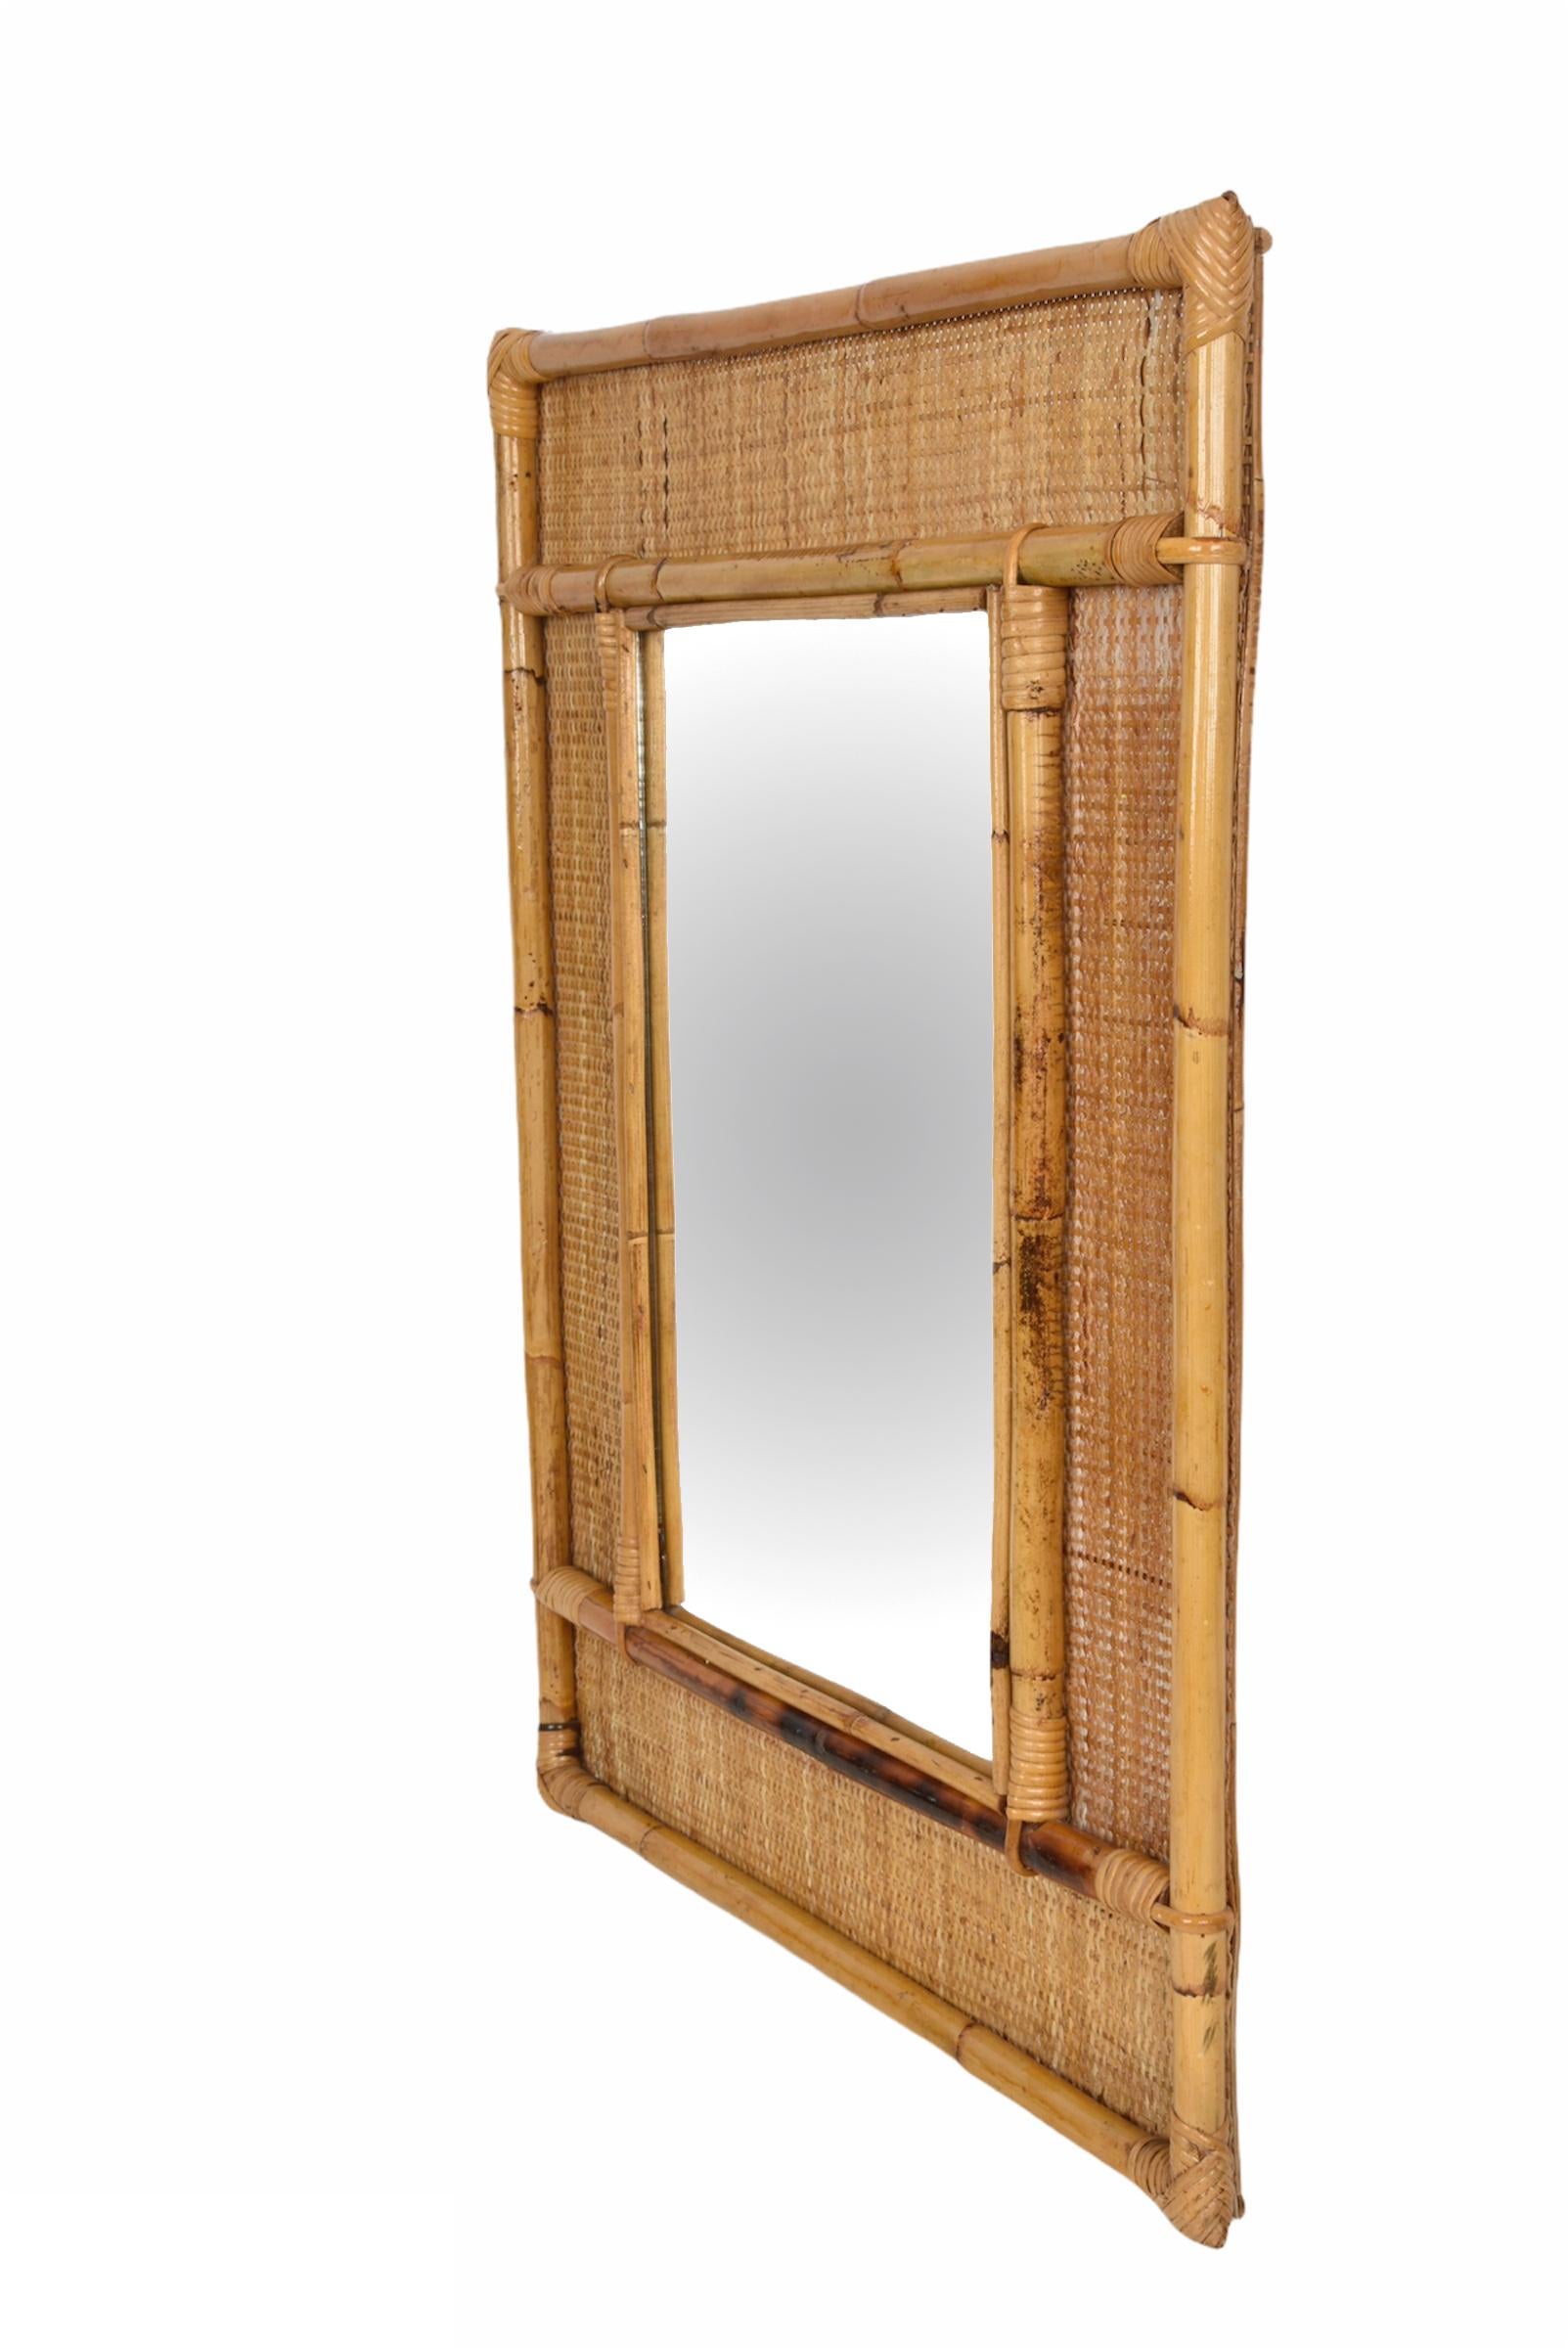 Midcentury Rectangular Italian Mirror with Bamboo and Woven Wicker Frame, 1970s 6